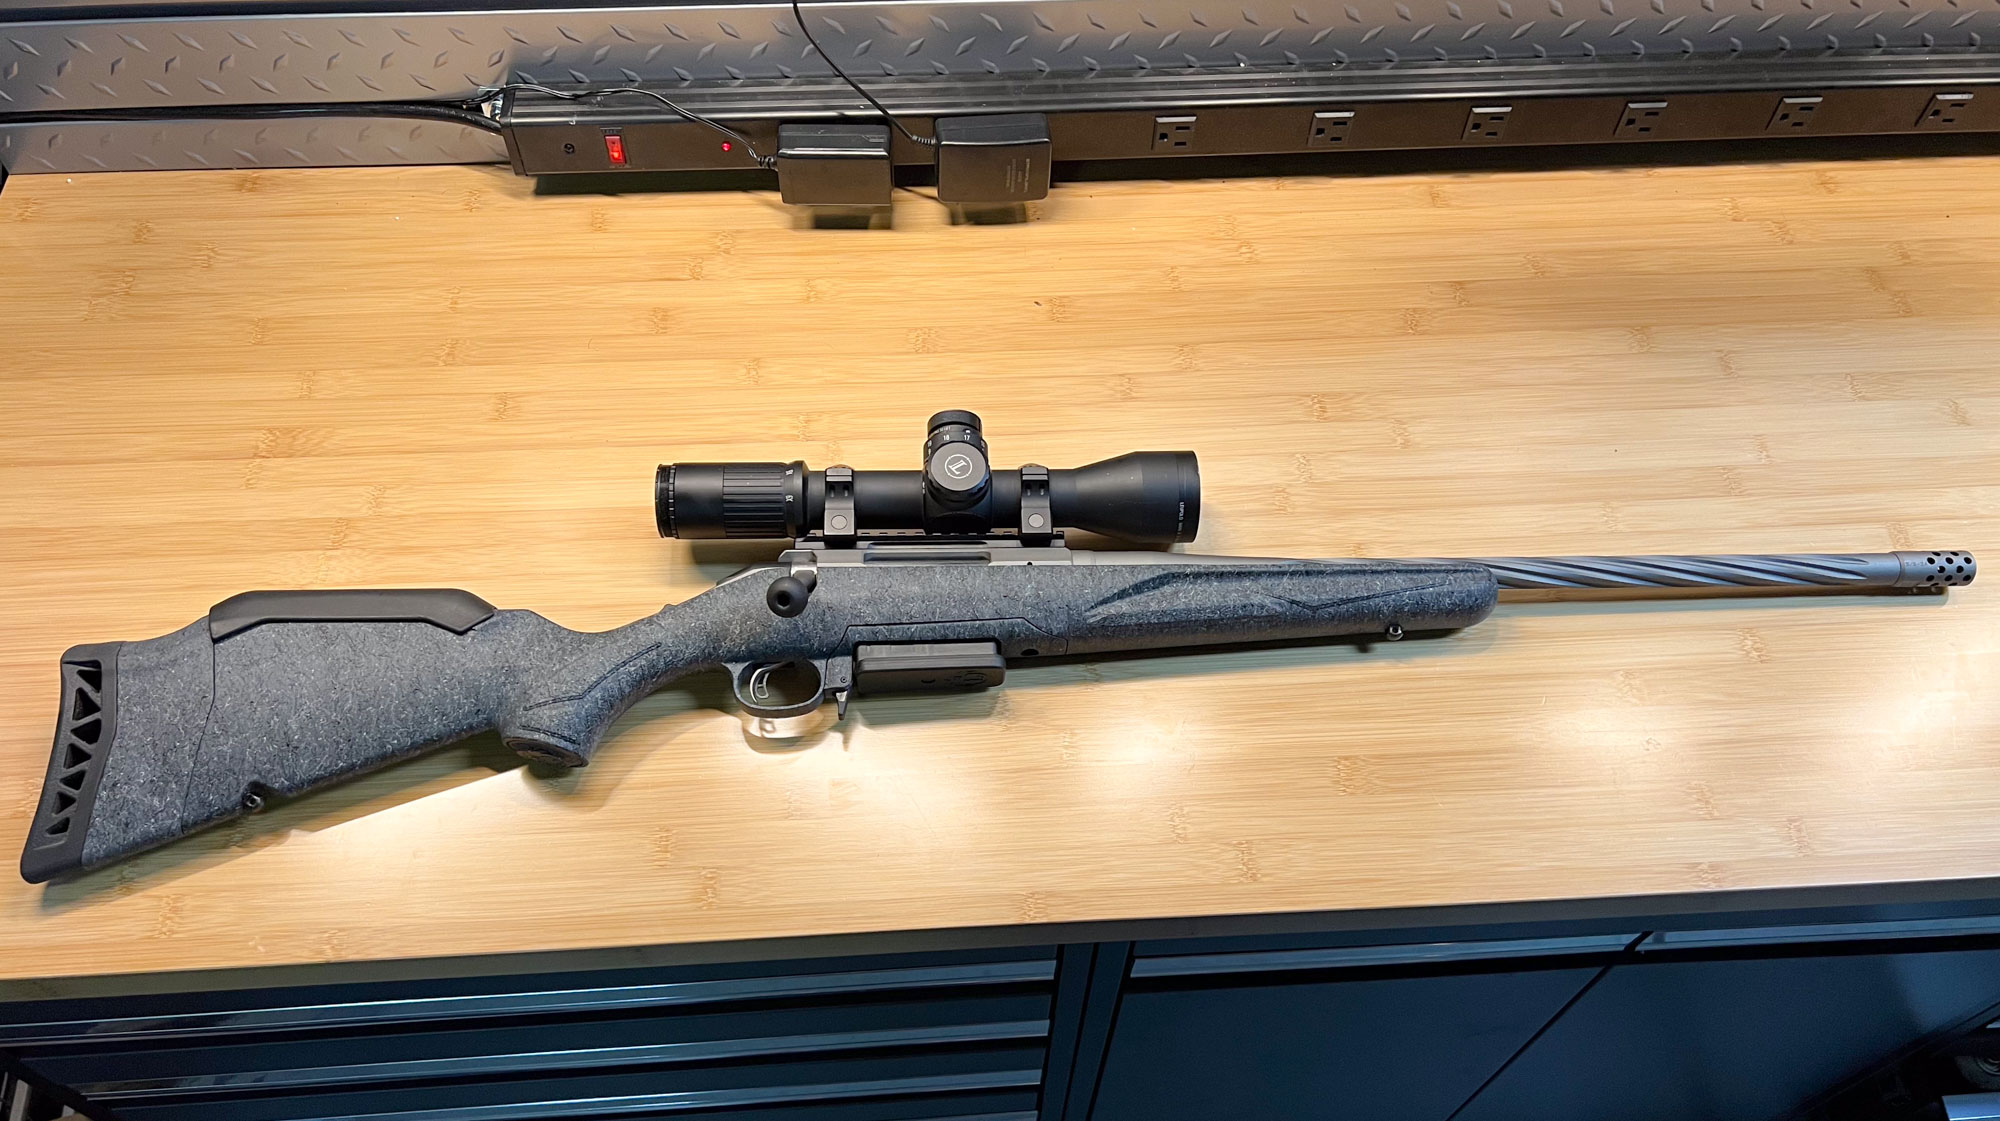 Ruger American Rifle Generation II